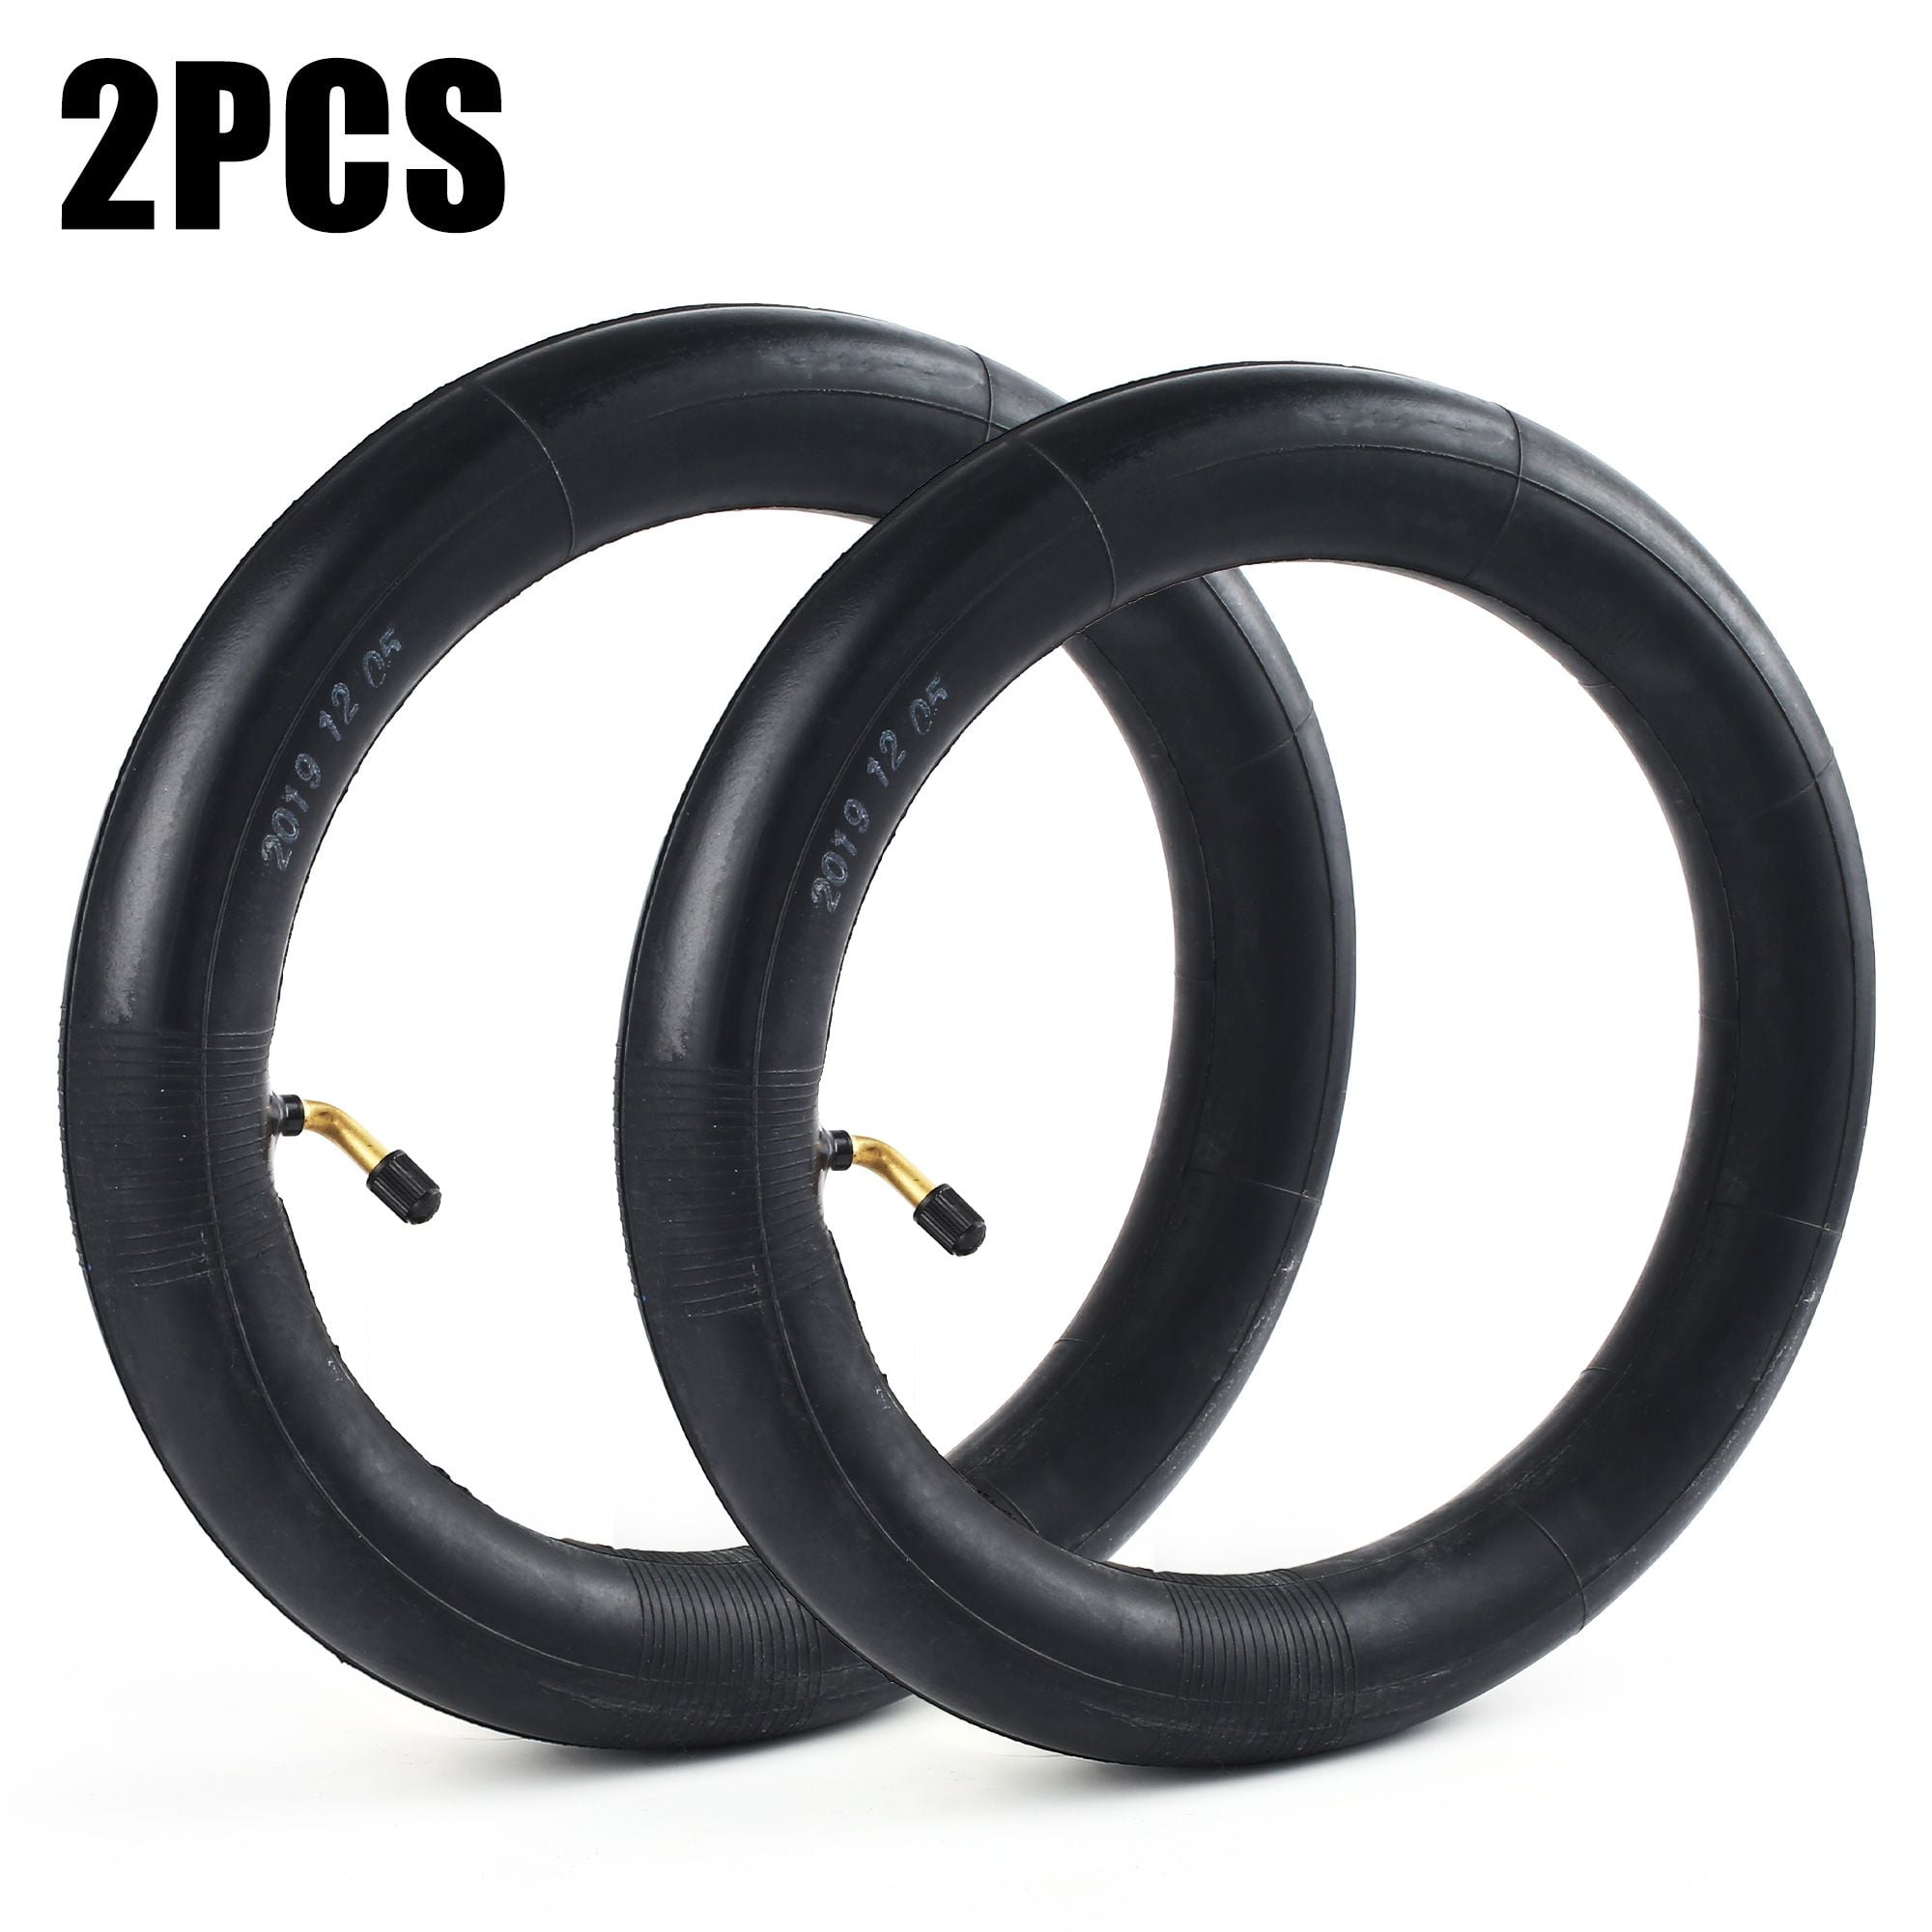 12.5 X 2.25 INNER TUBE WITH STRAIGHT VALVE STEM 12 1/2 X 2 1/4 ELECTRIC SCOOTERS 